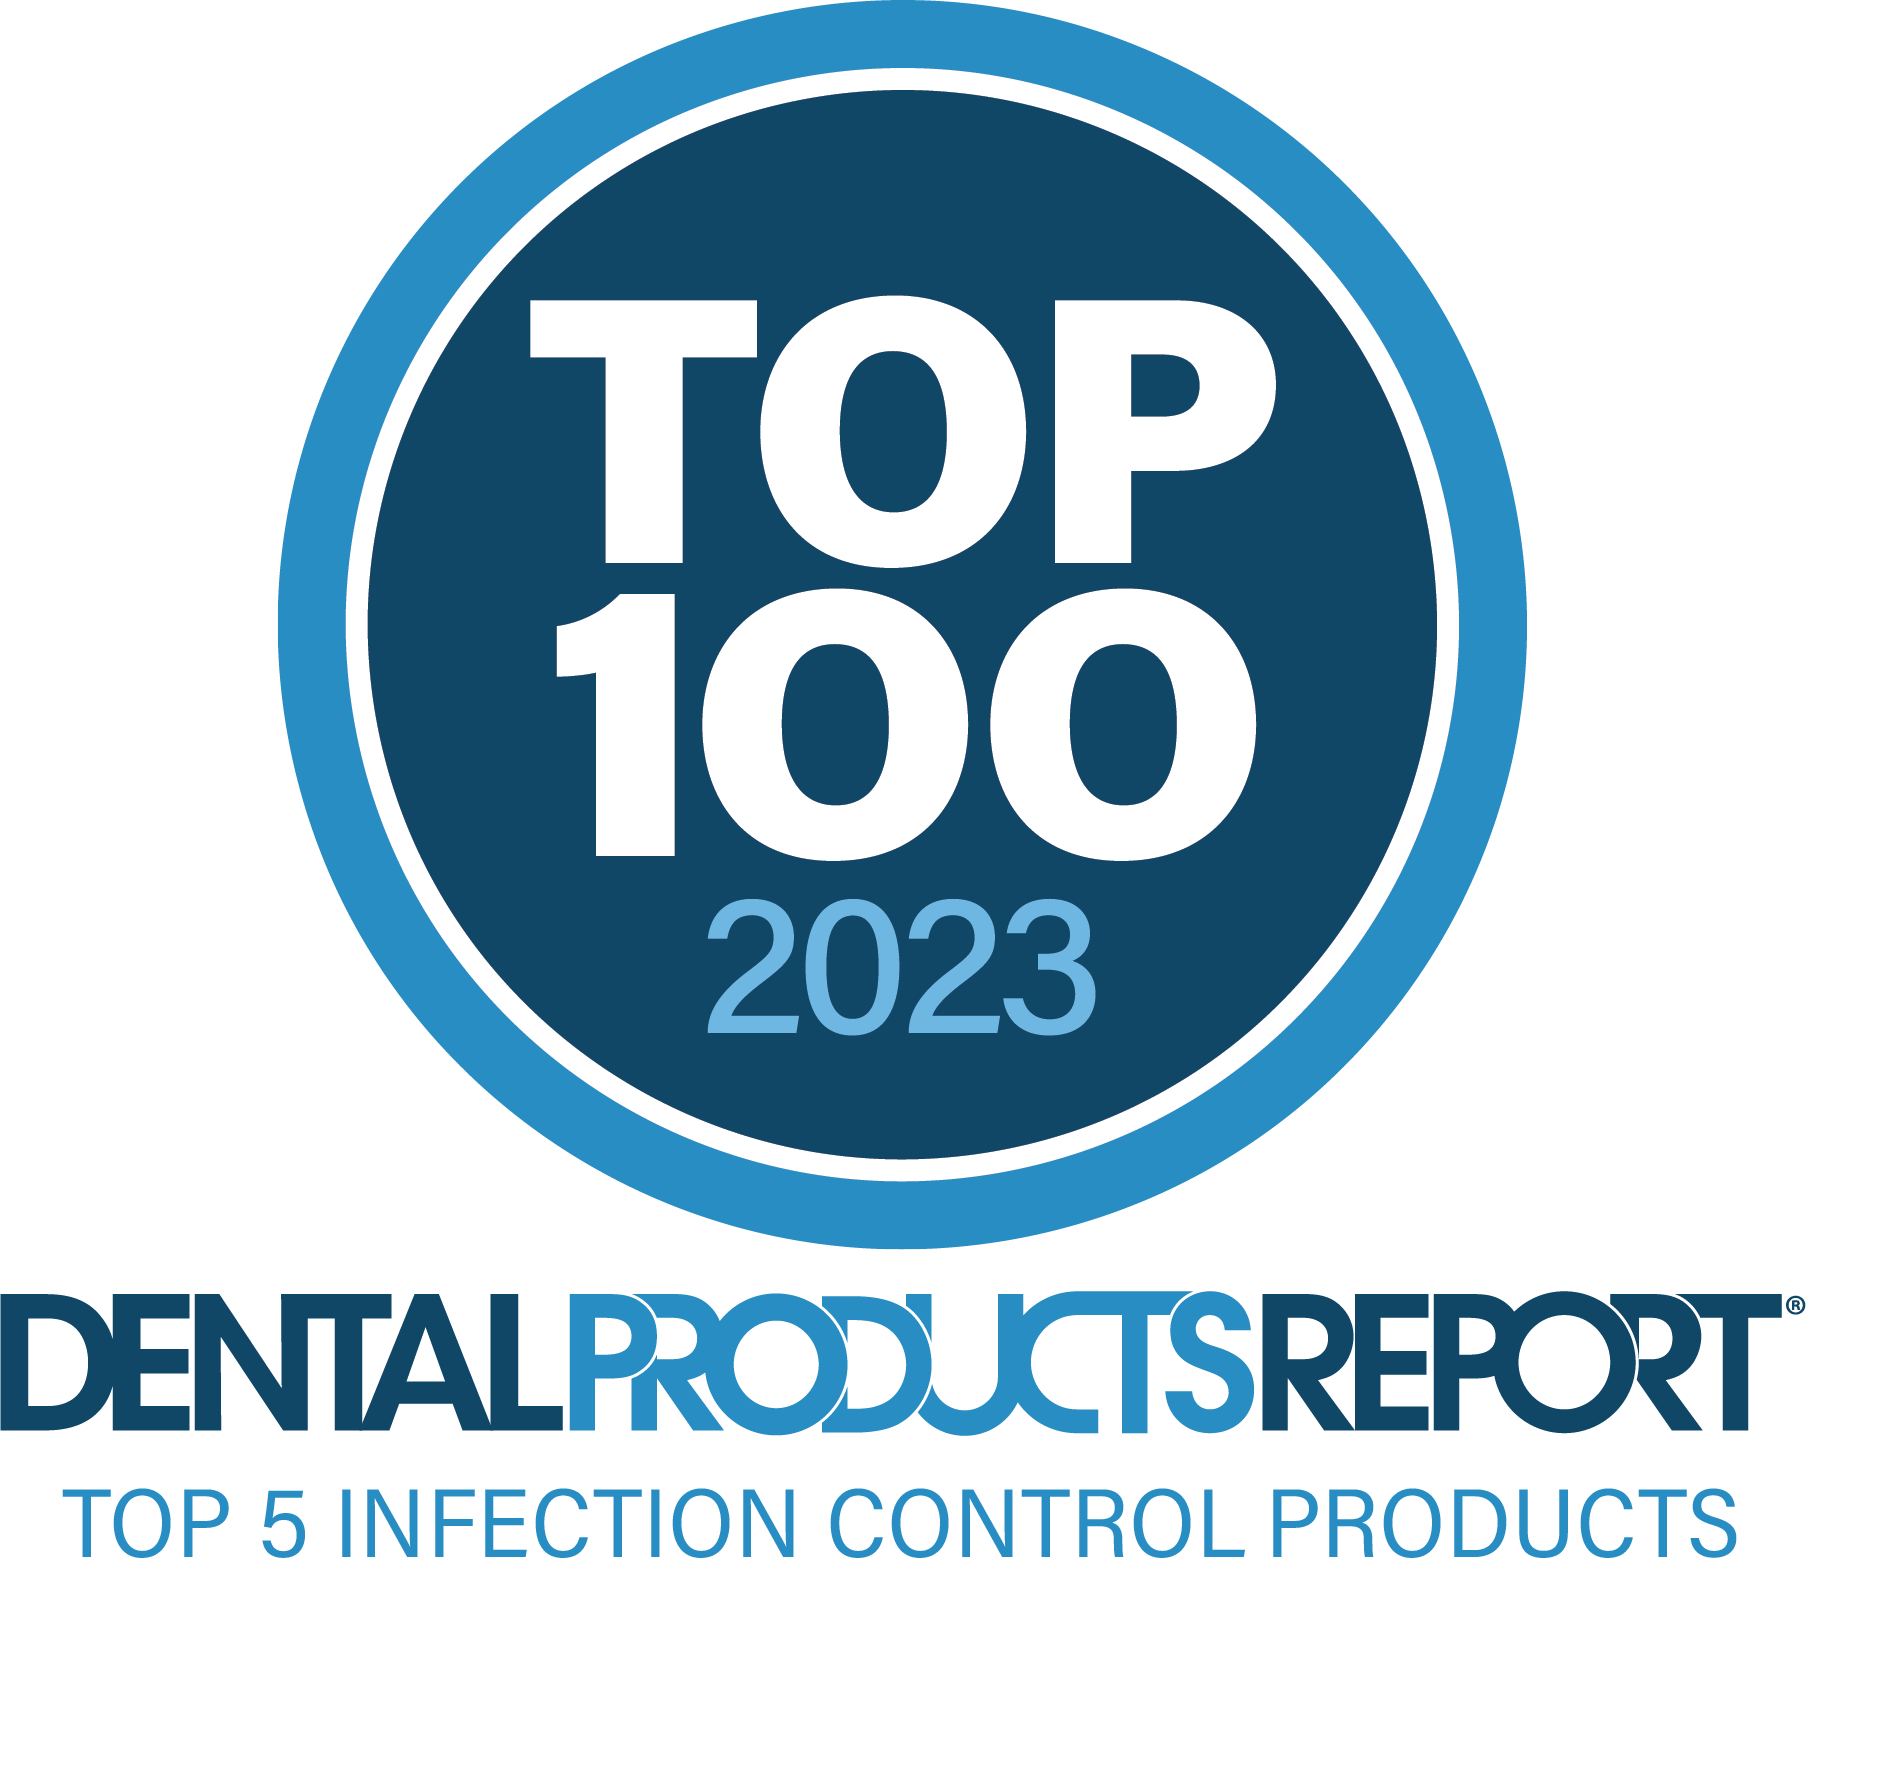 DPR Top 100: The Top 5 Infection Control Products of 2023